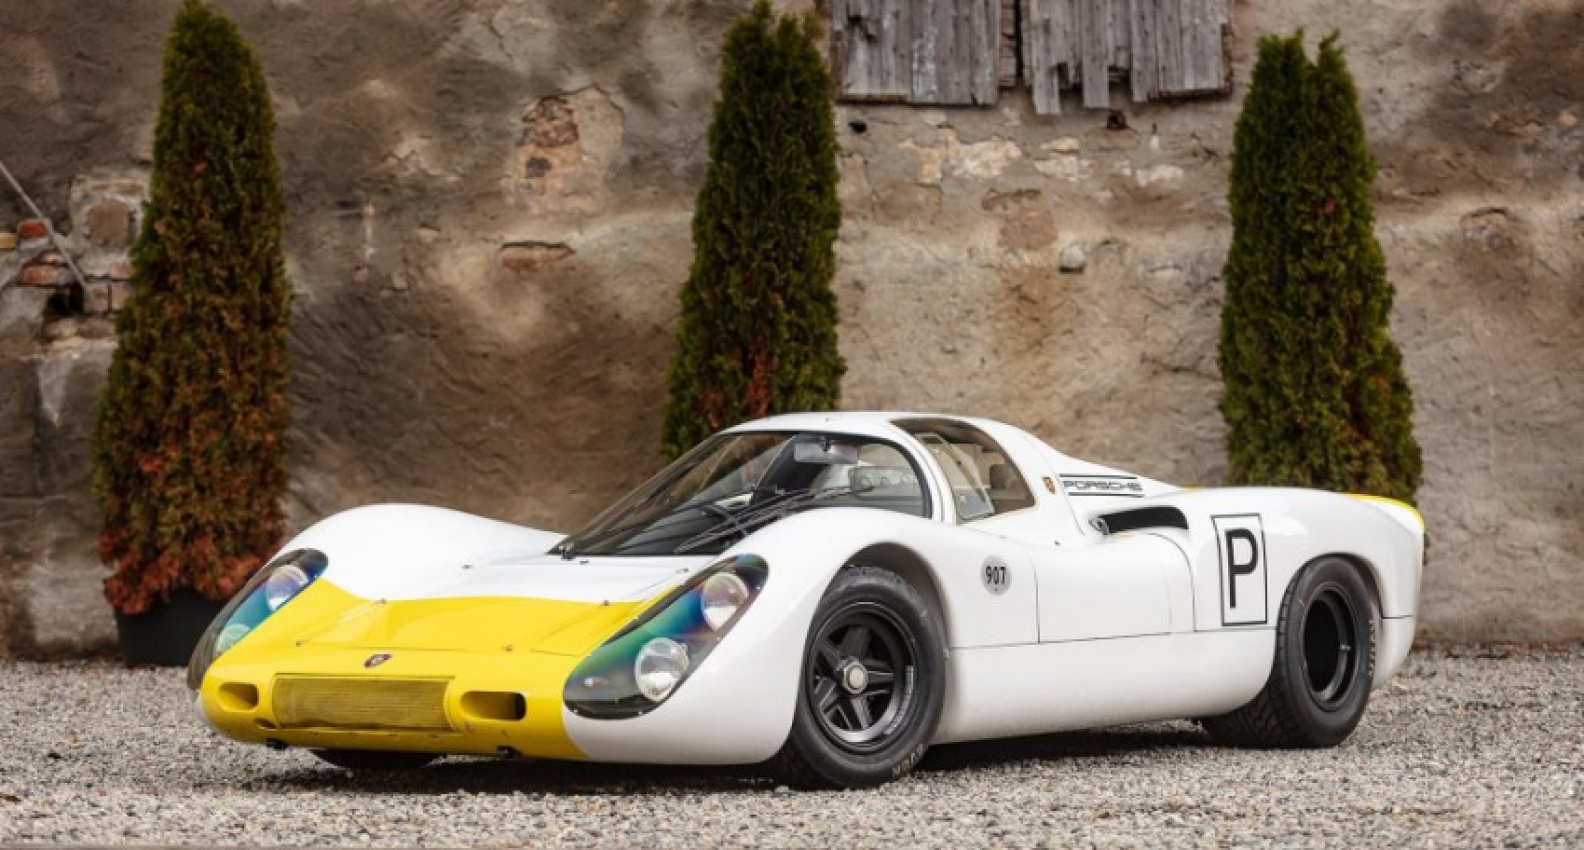 acer, autos, cars, porsche, we simply can’t pick between this pair of perfect porsche racers